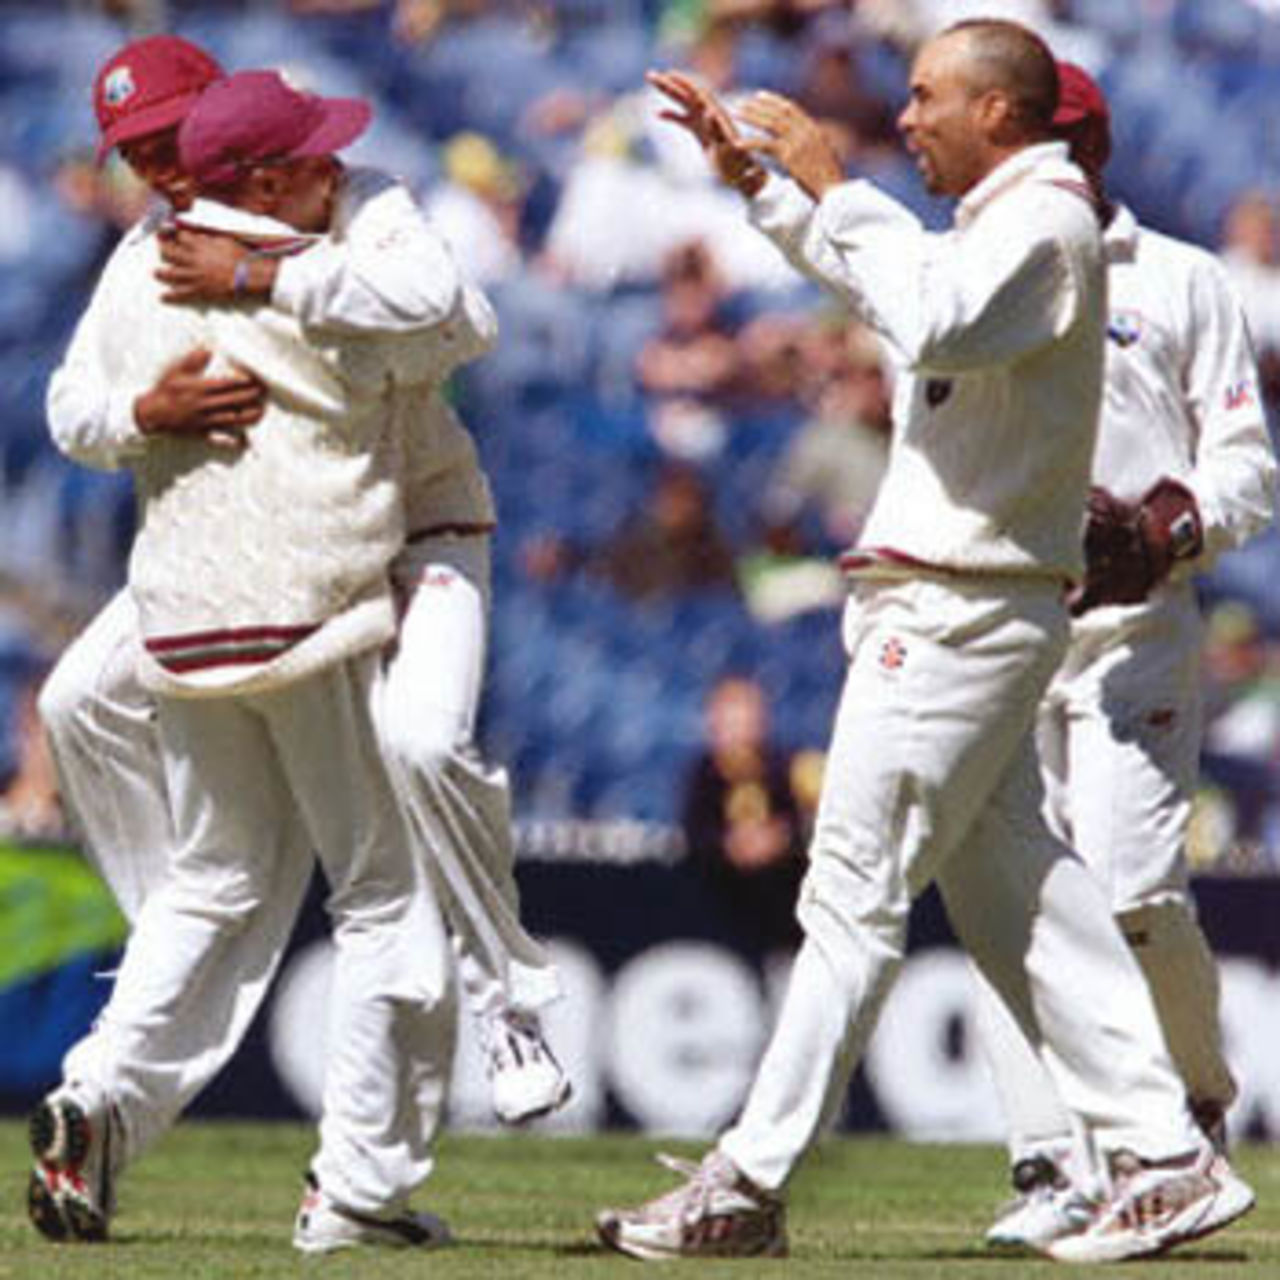 West Indies Darren Ganga (L) celebrates a catch of Australian batsman Justin Langer with teammates Brian Lara (2/L) and Jimmy Adams (R) on the third day of the fourth Test Match at the MCG in Melbourne, 28 December 2000. Australia in their second innings is 165-3 at tea for a daunting 364 run lead.